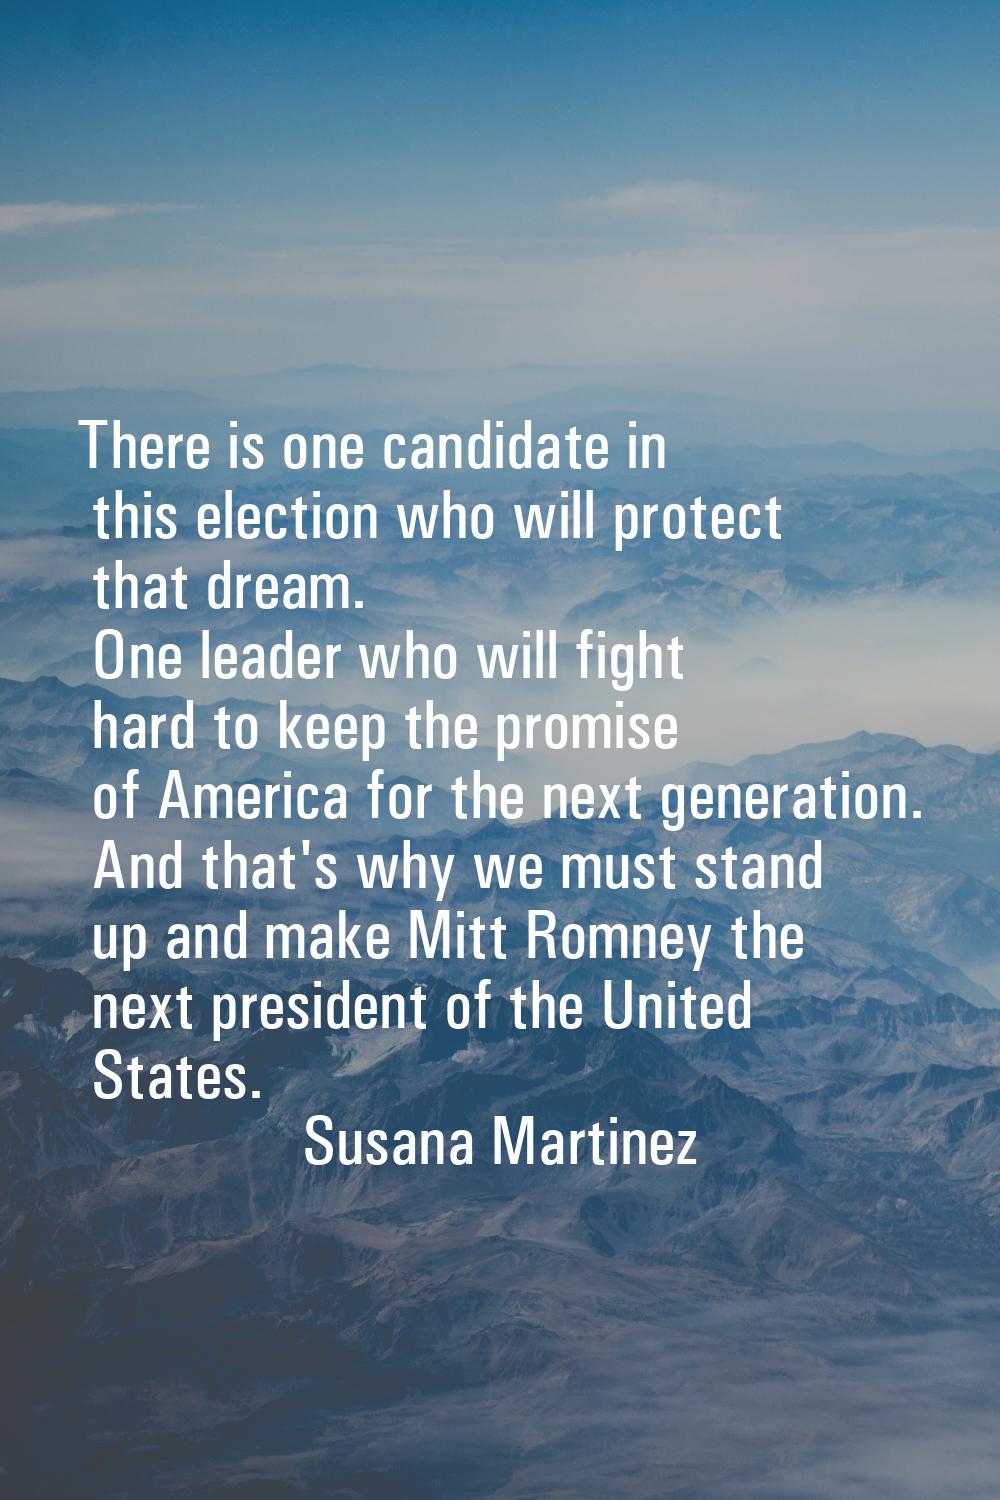 There is one candidate in this election who will protect that dream. One leader who will fight hard